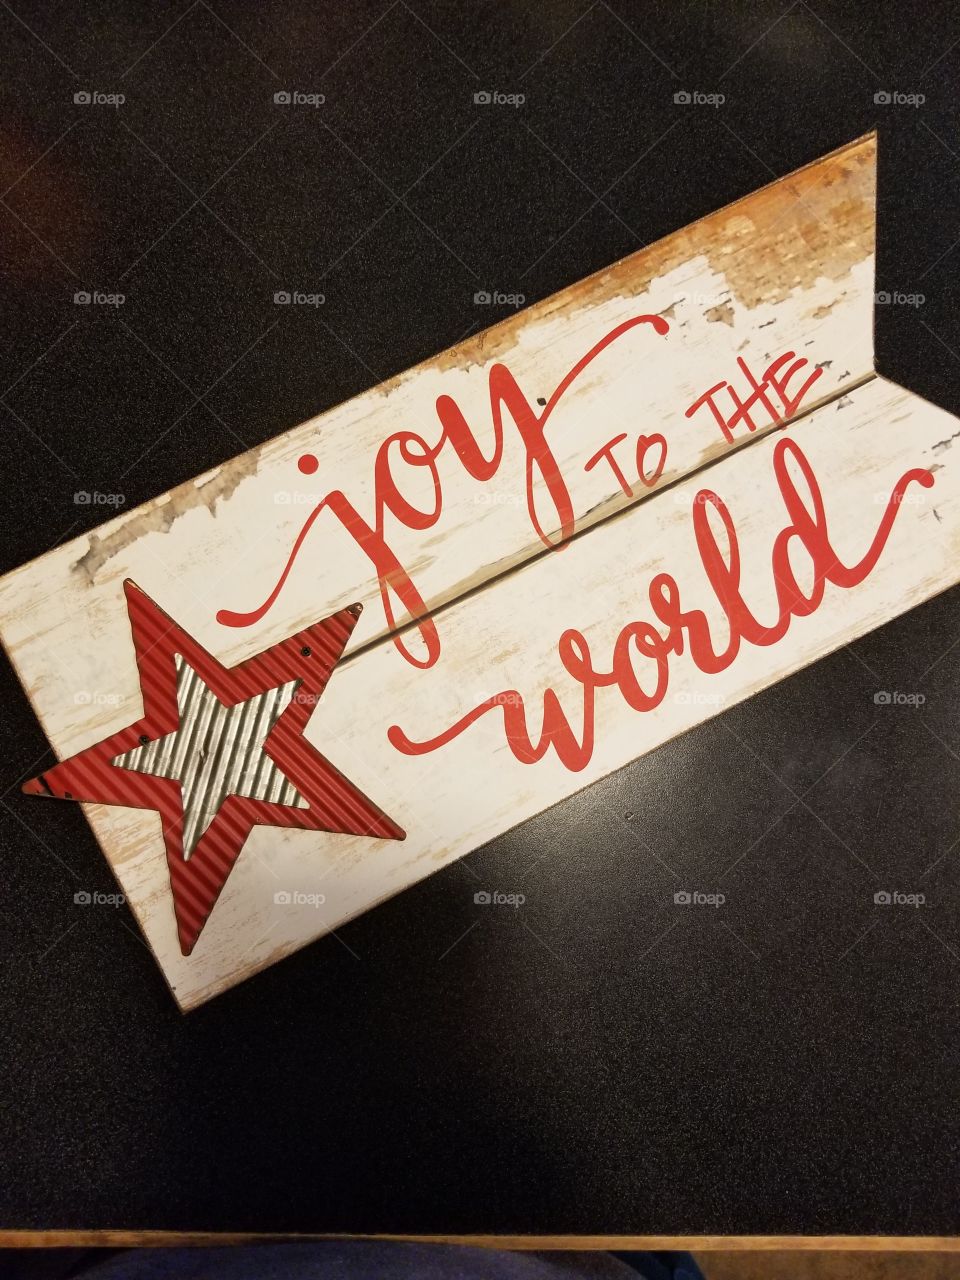 joy to the world sign accented by colored metal stars, Christmas cheer